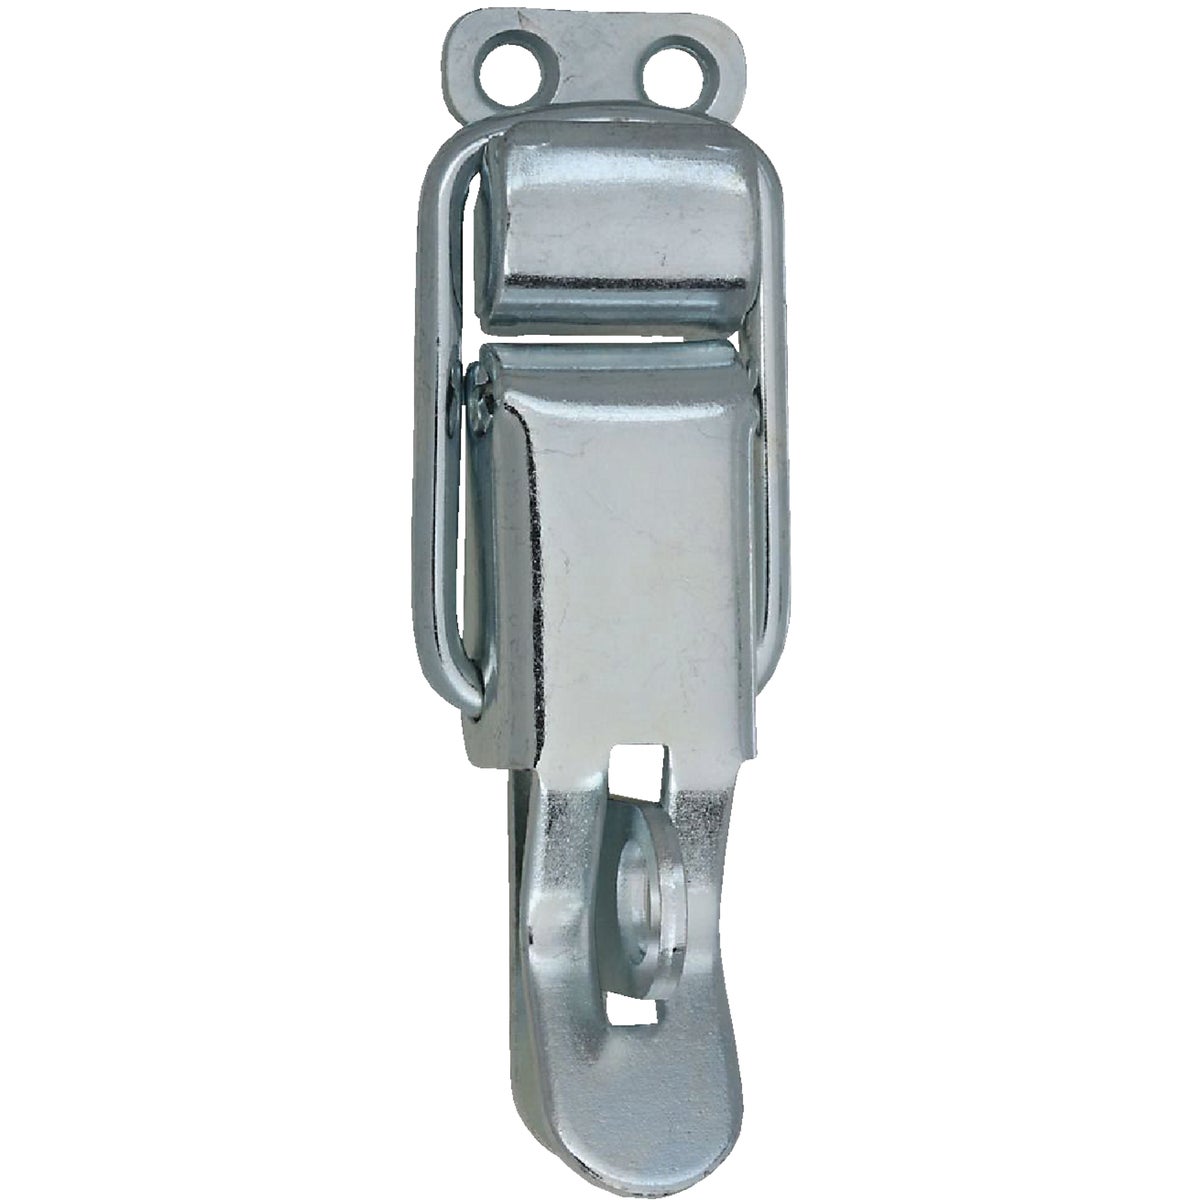 Item 203890, .110 steel construction. Latches for tight, secure closing.